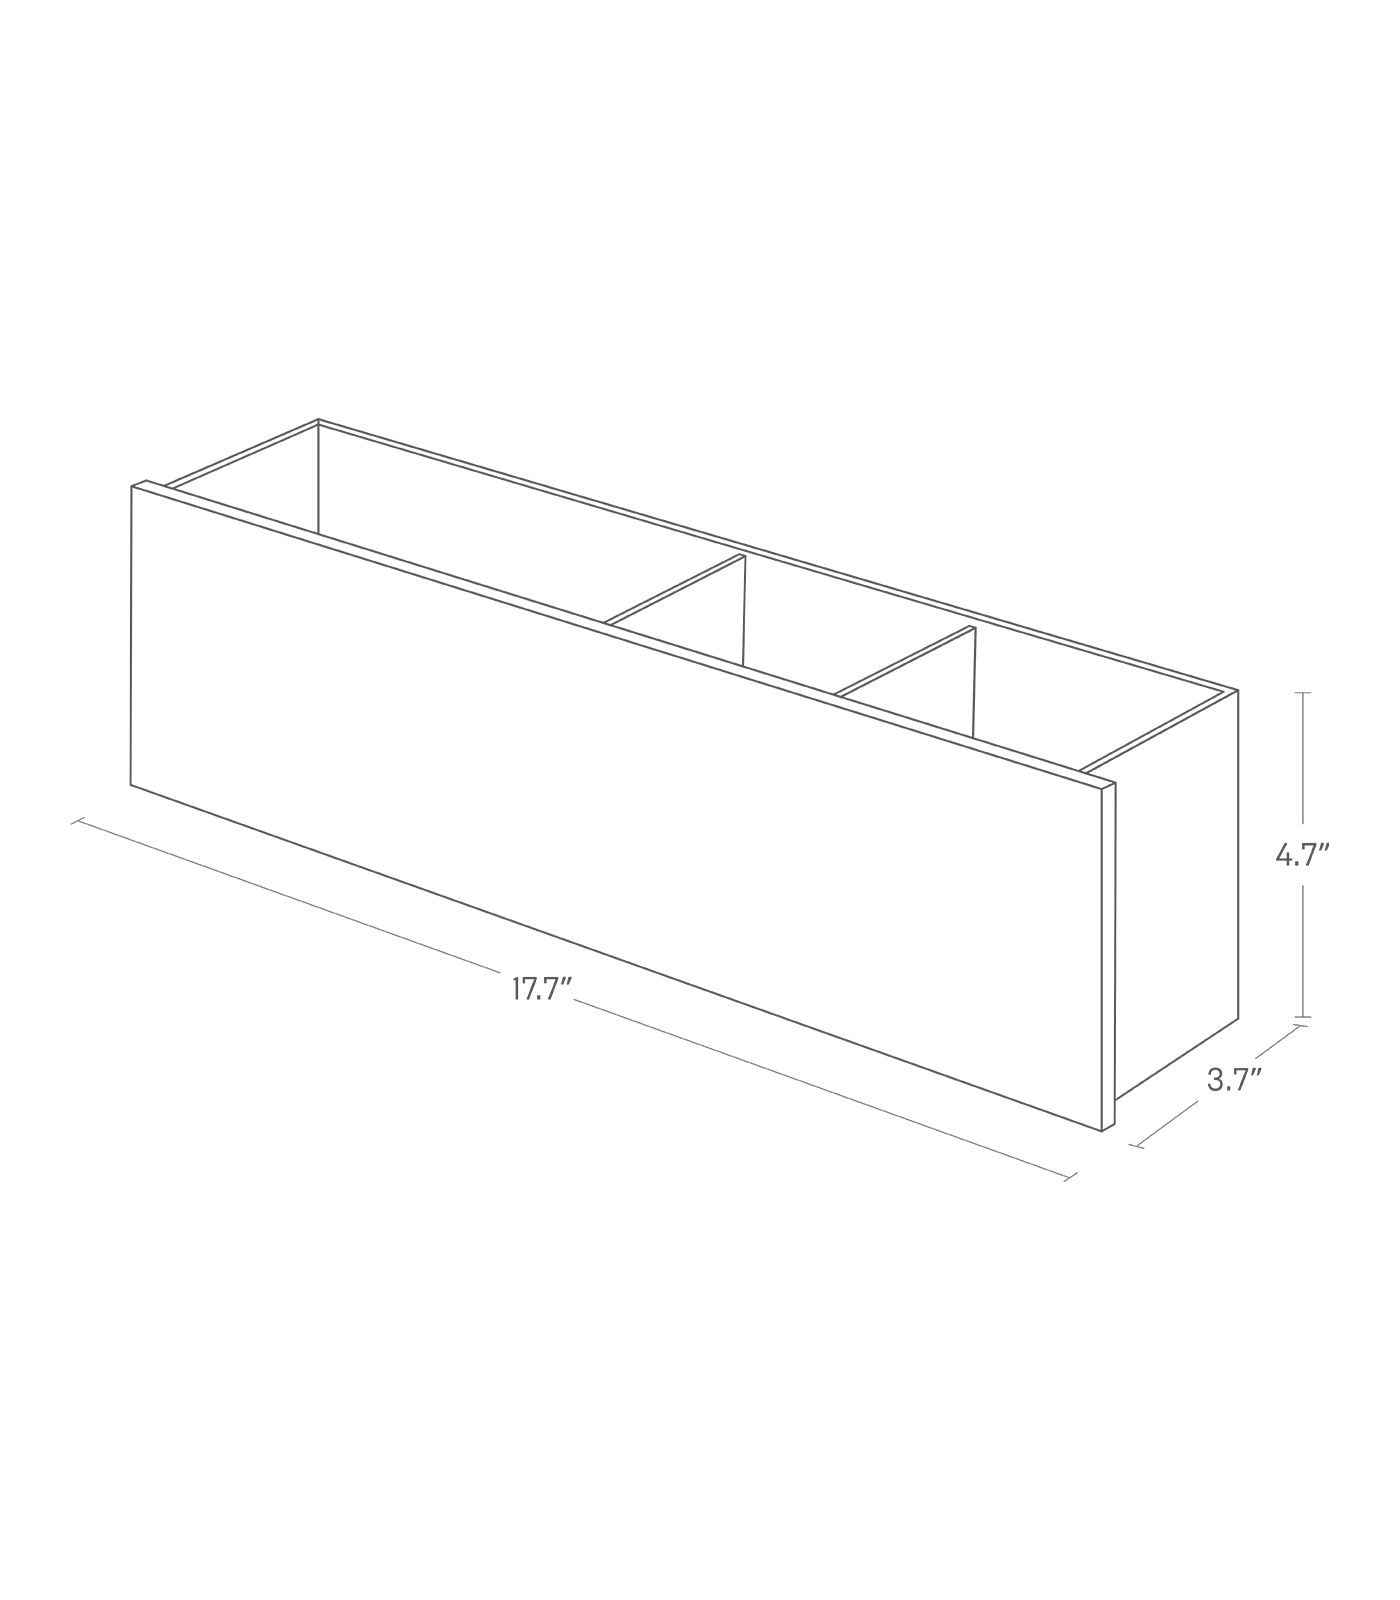 Dimension image for Desk Organizer - Two Sizes on a white background including dimensions  L 3.74 x W 17.72 x H 4.72 inches